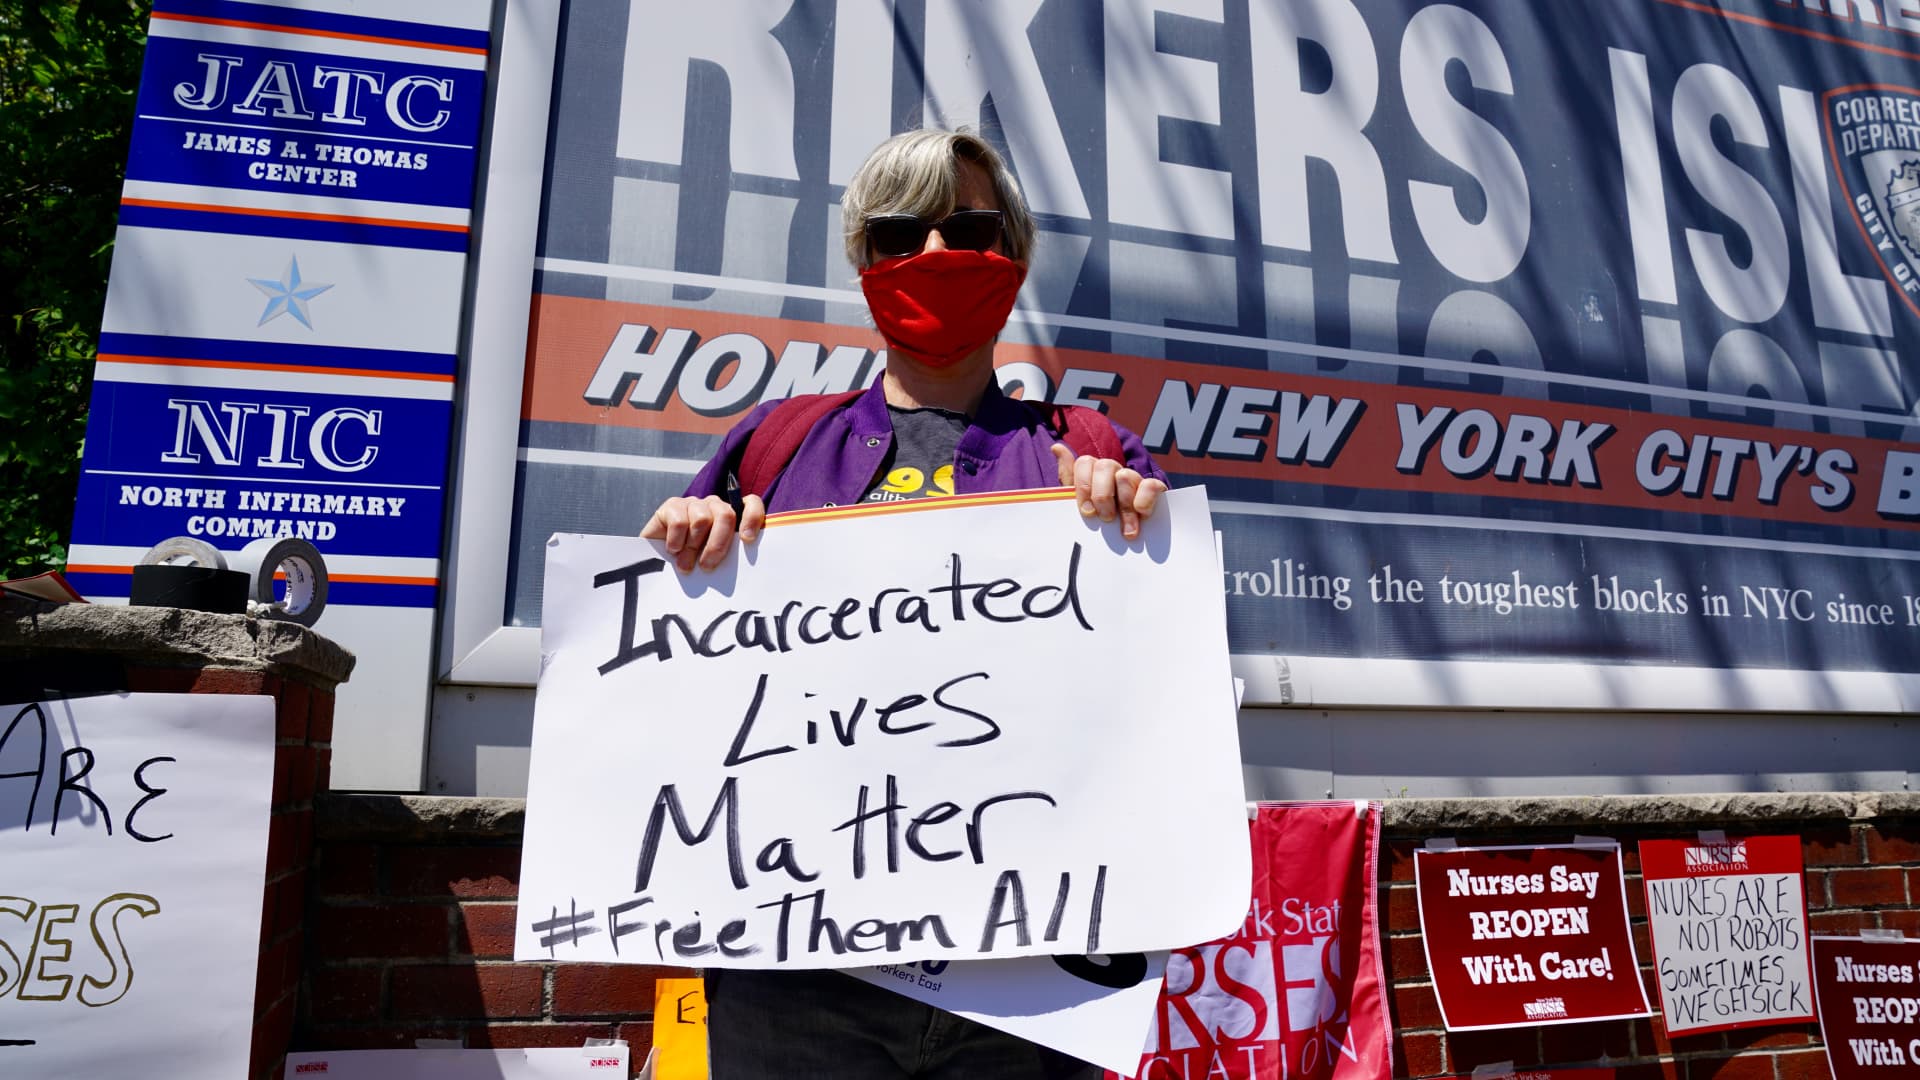 A nurse holds a sign during a nurses protest at Rikers Island Prison over conditions and coronavirus threat on May 7, 2020 in New York City.